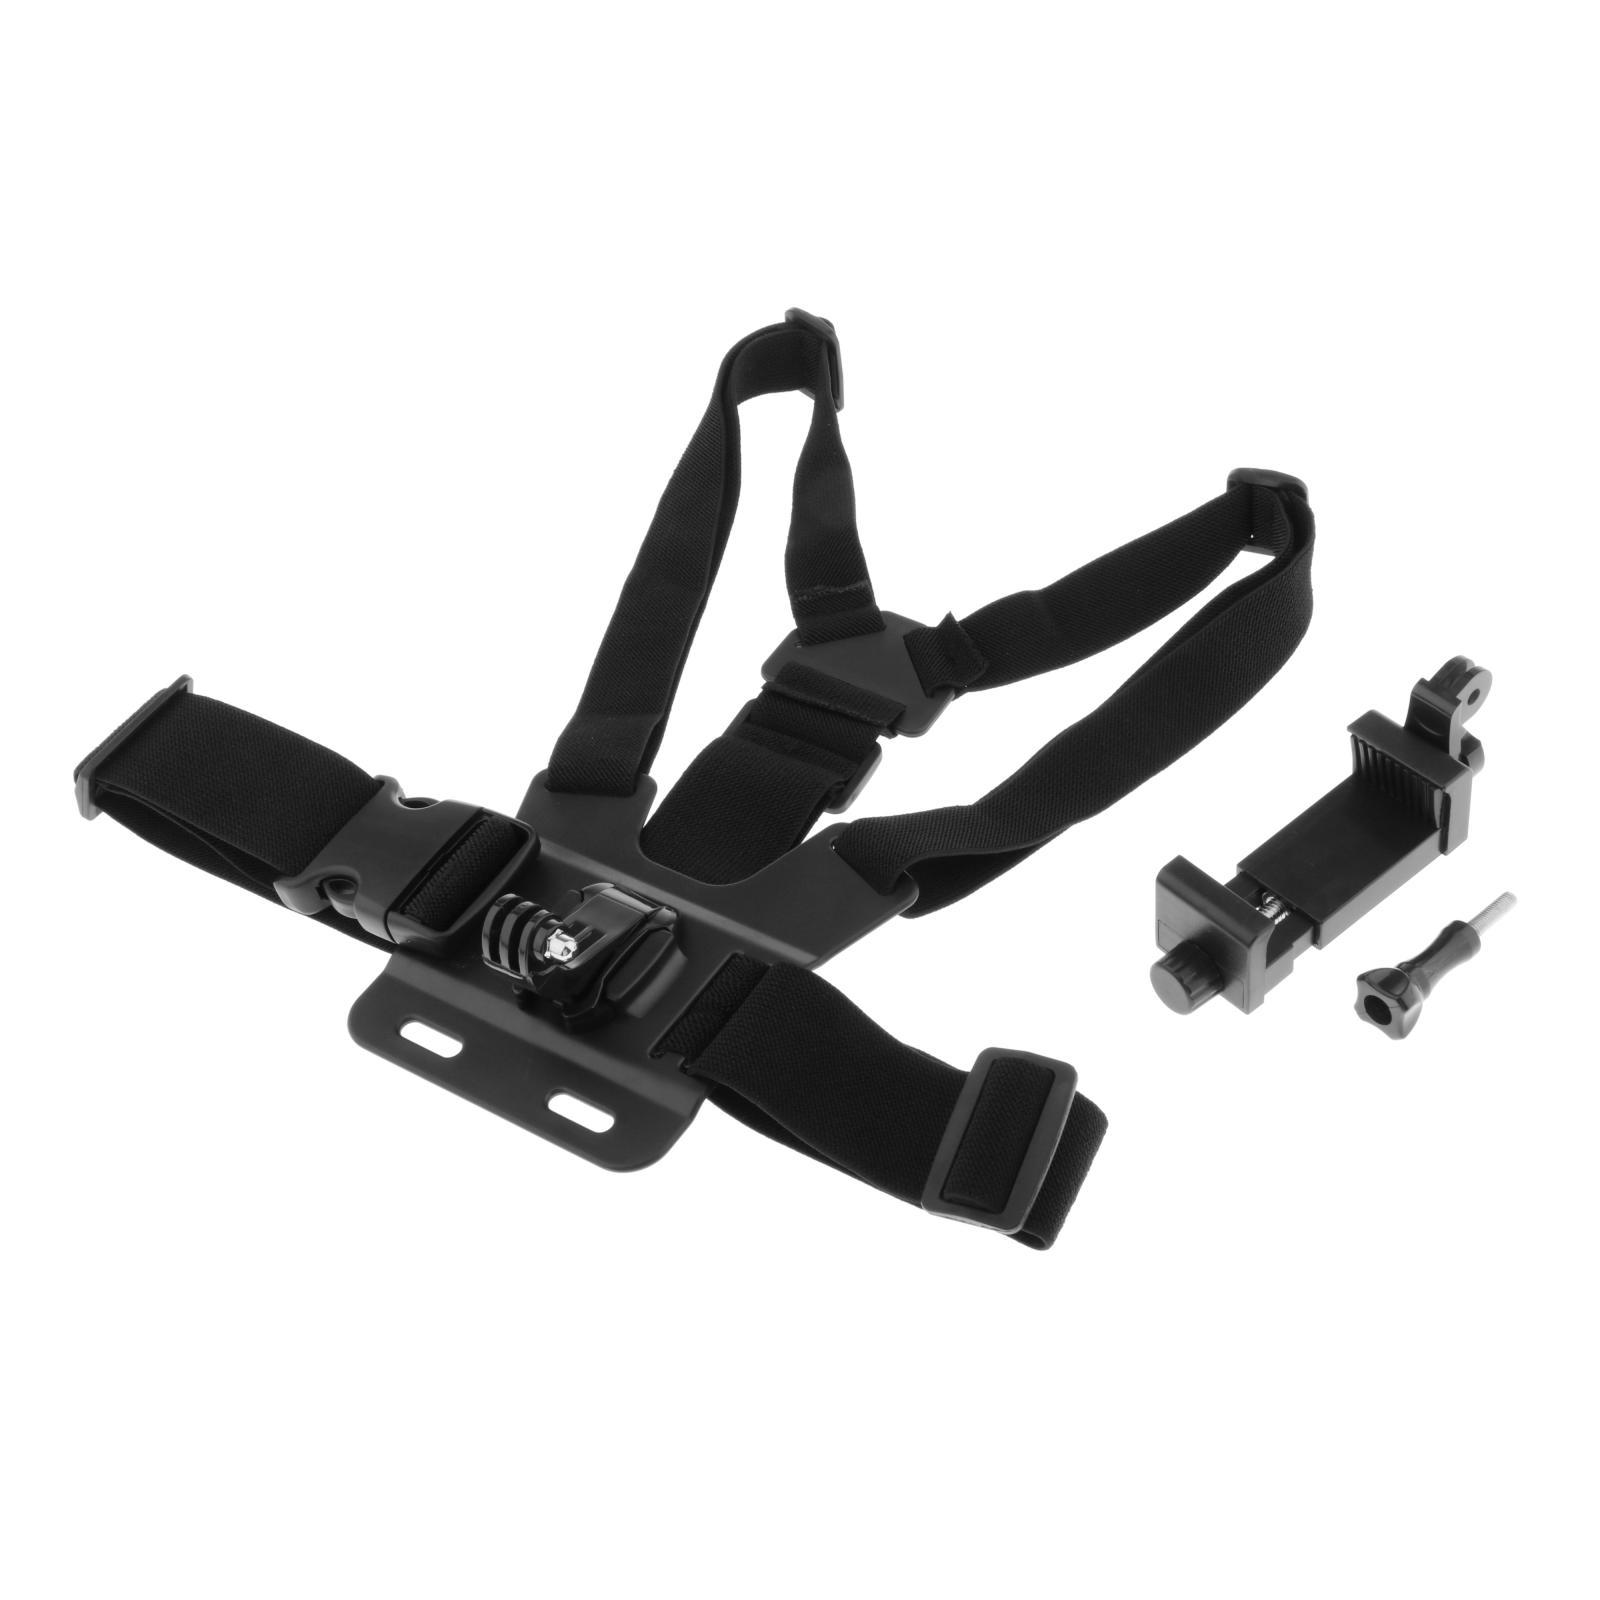 Smartphone Chest Mount Harness Strap Holder with Cell Phone Clip Adjustable